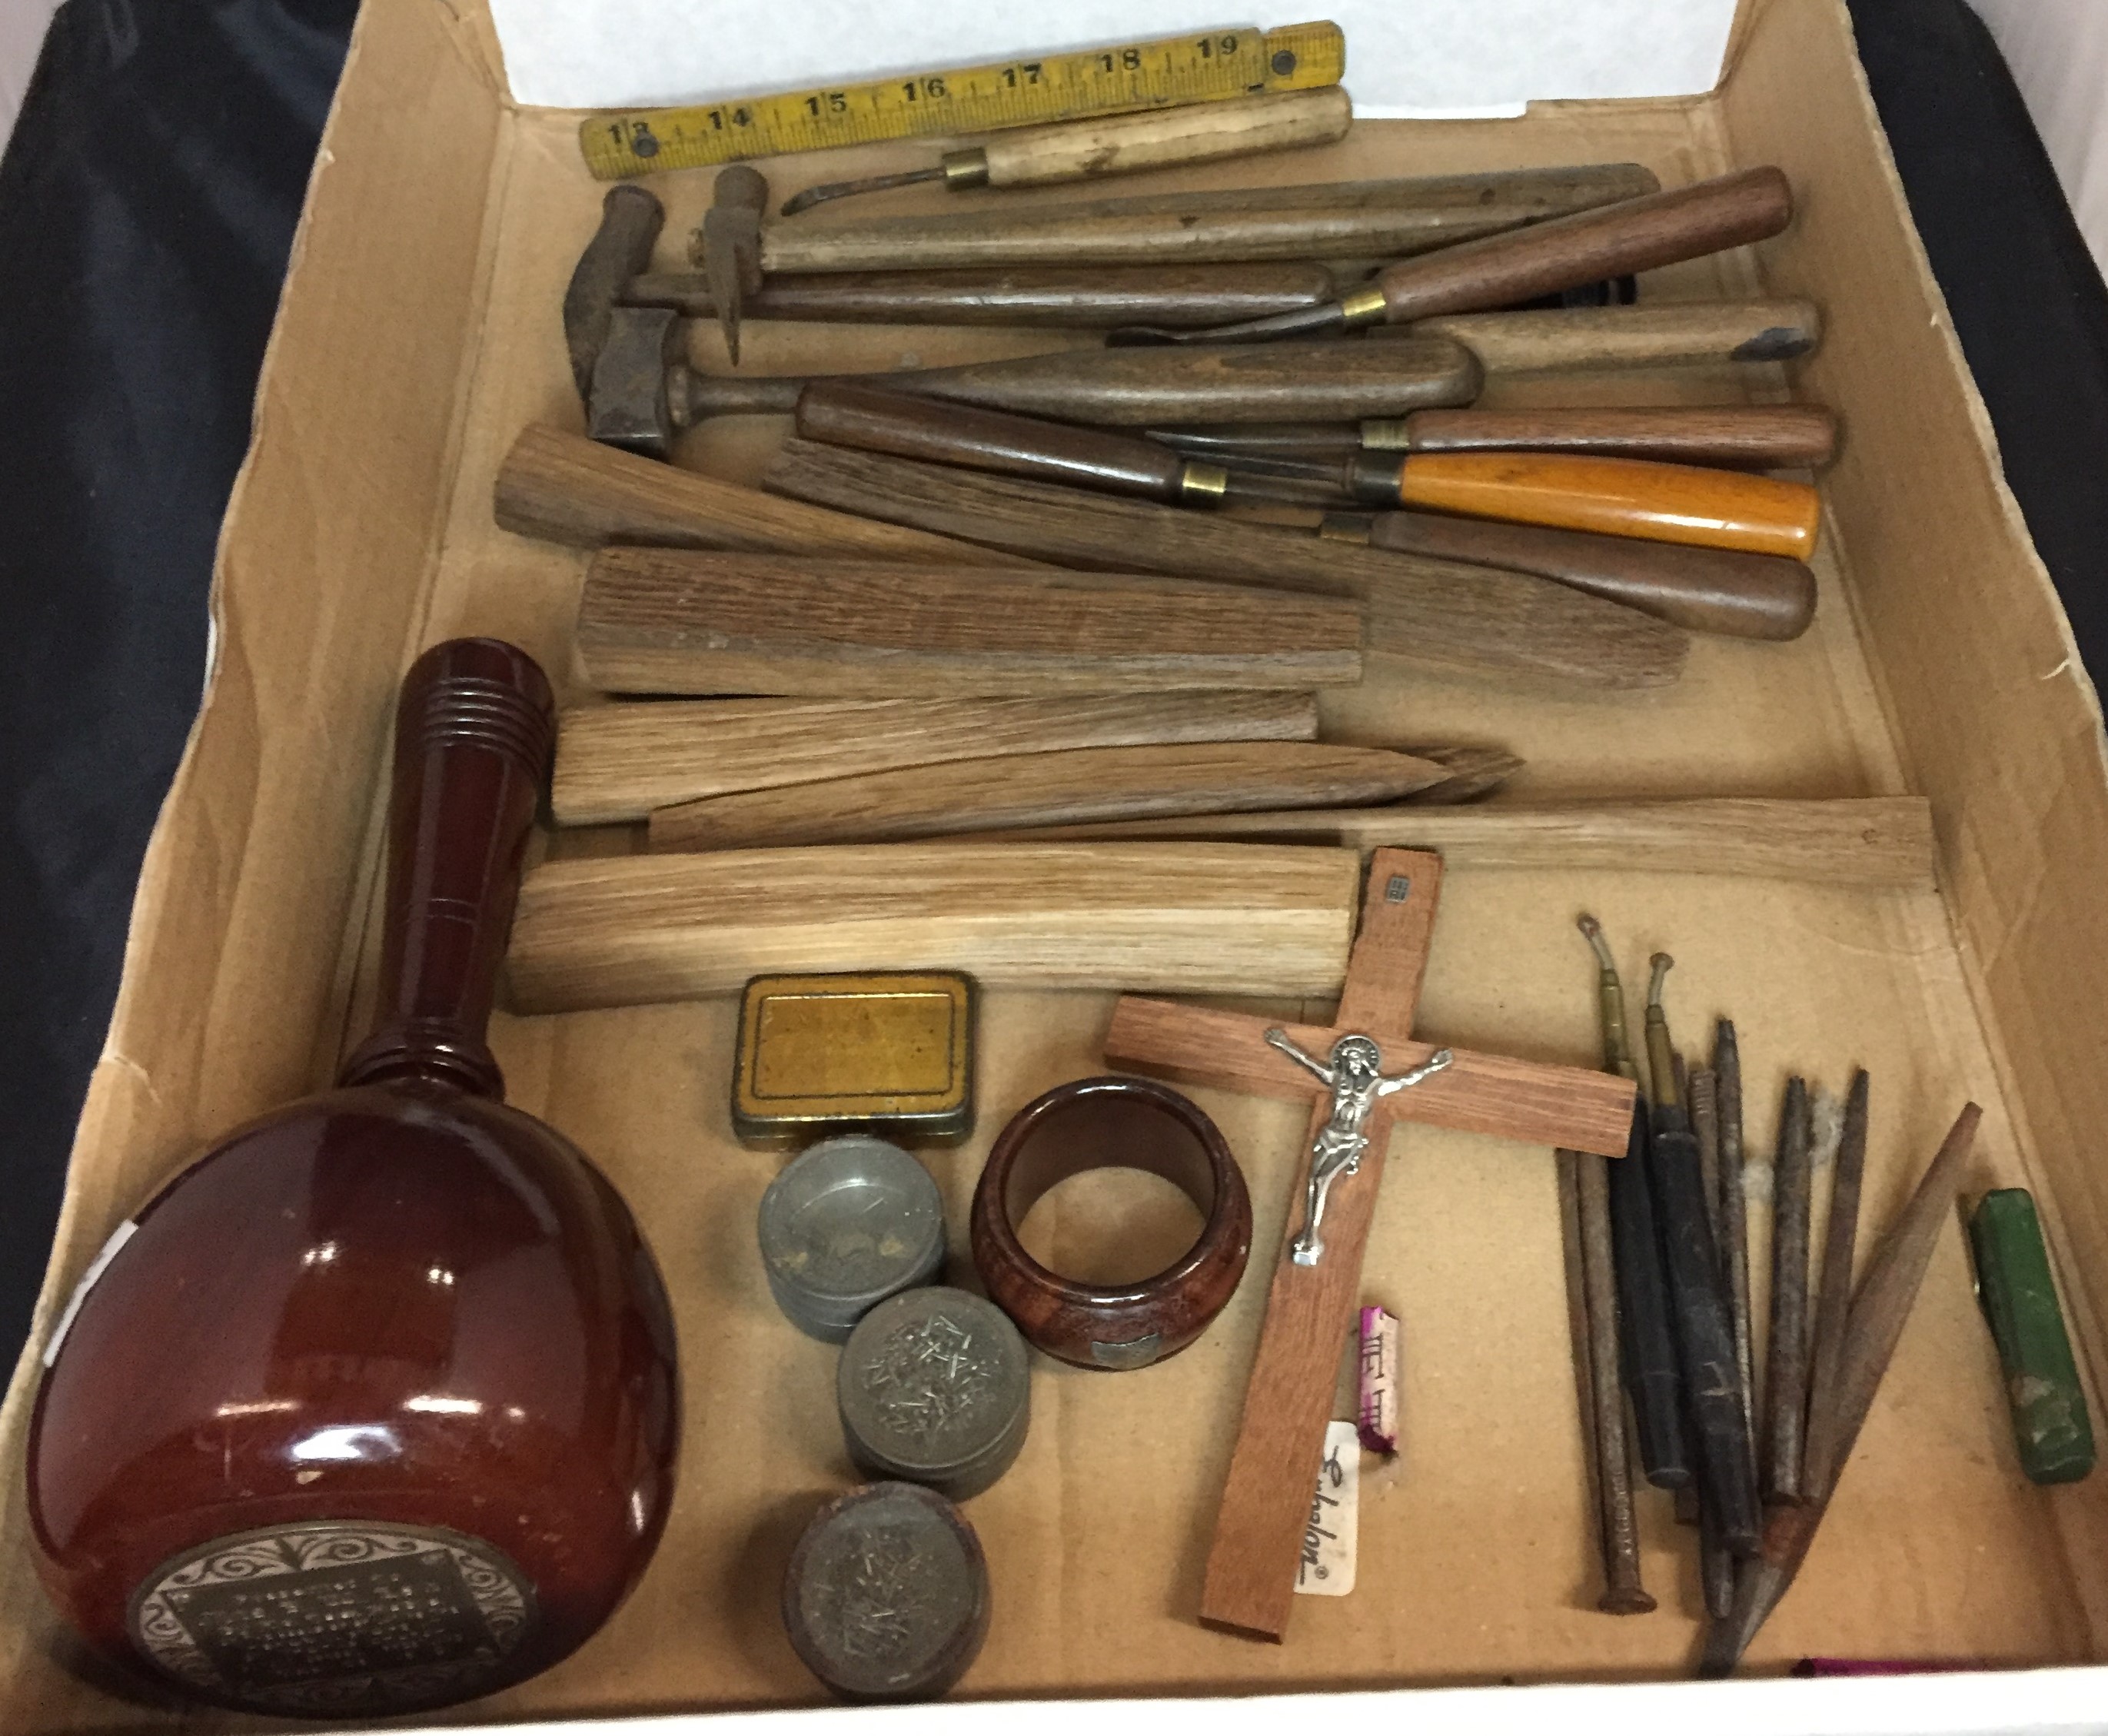 Contents to tray including upholsterer's/carvers tools,